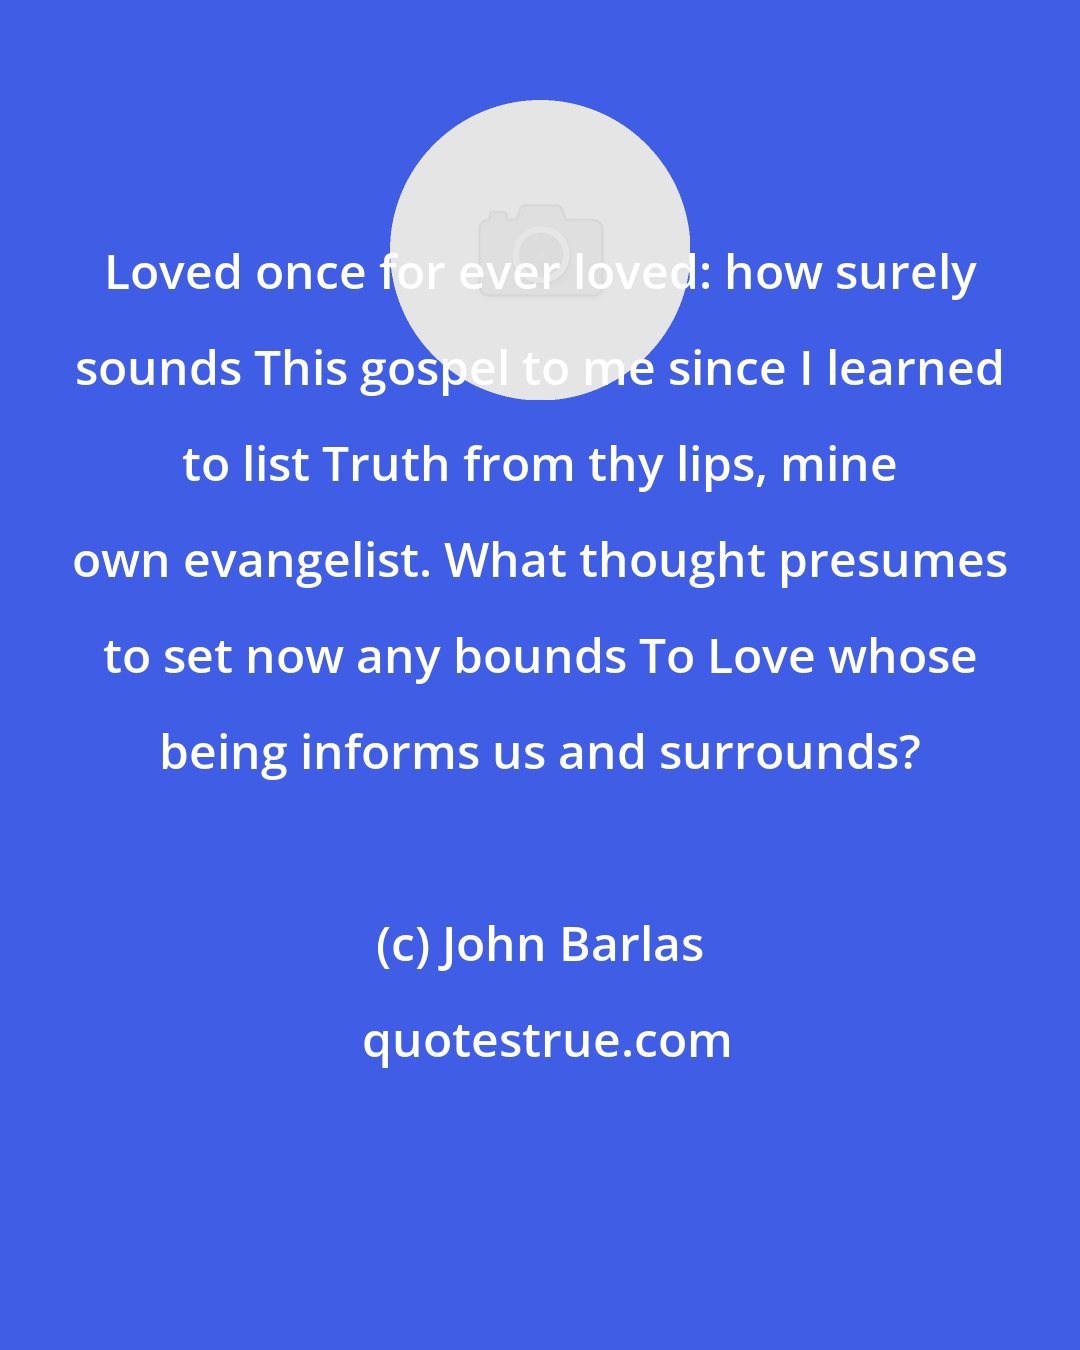 John Barlas: Loved once for ever loved: how surely sounds This gospel to me since I learned to list Truth from thy lips, mine own evangelist. What thought presumes to set now any bounds To Love whose being informs us and surrounds?